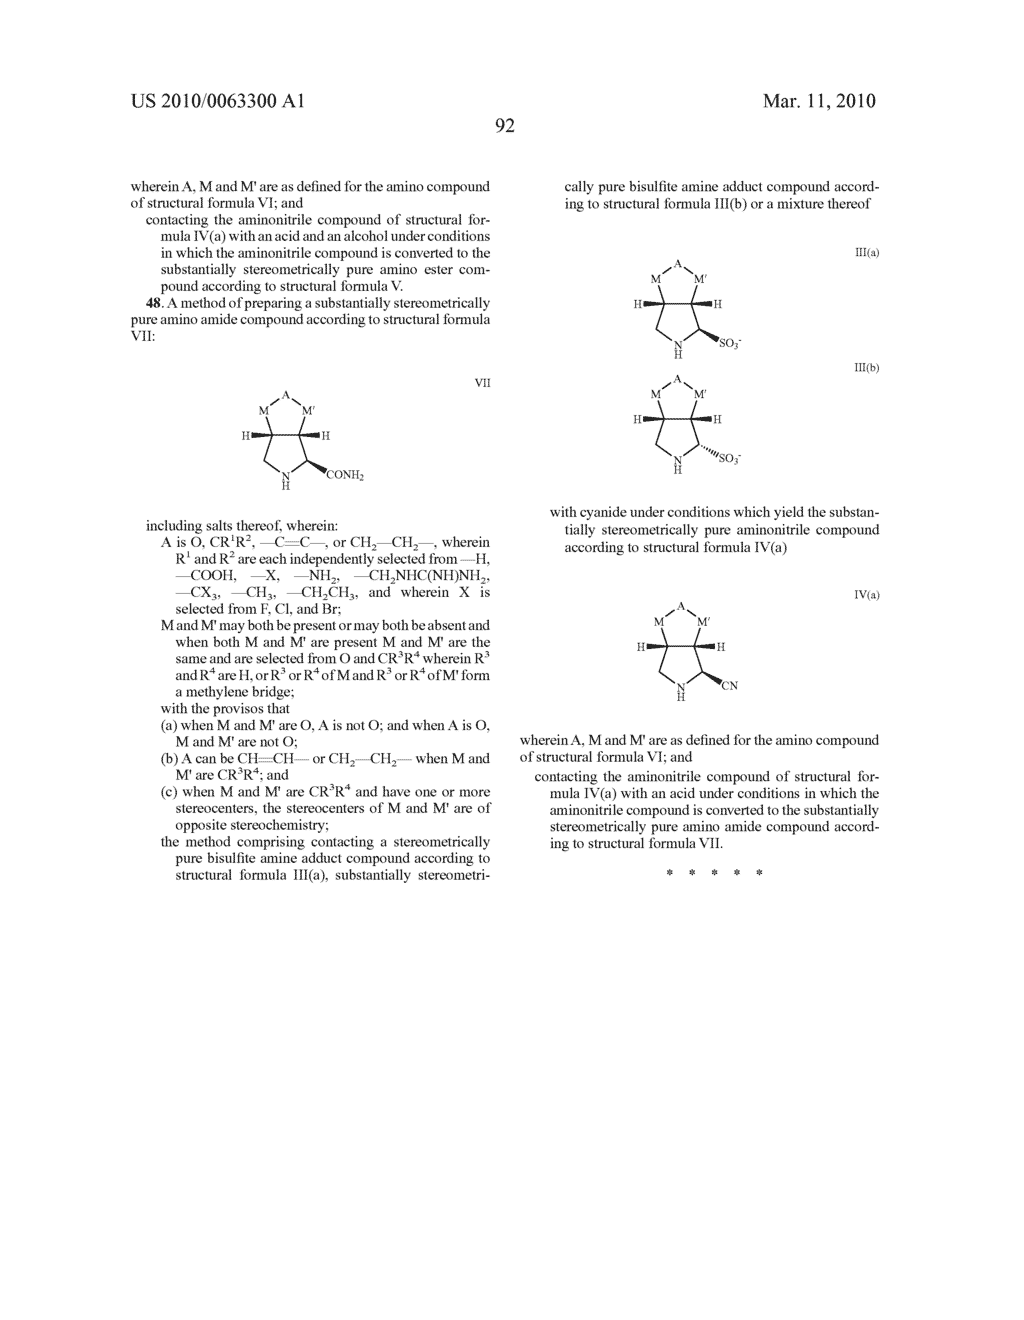 BIOCATALYTIC PROCESSES FOR THE PREPARATION OF SUBSTANTIALLY STEREOMERICALLY PURE FUSED BICYCLIC PROLINE COMPOUNDS - diagram, schematic, and image 93